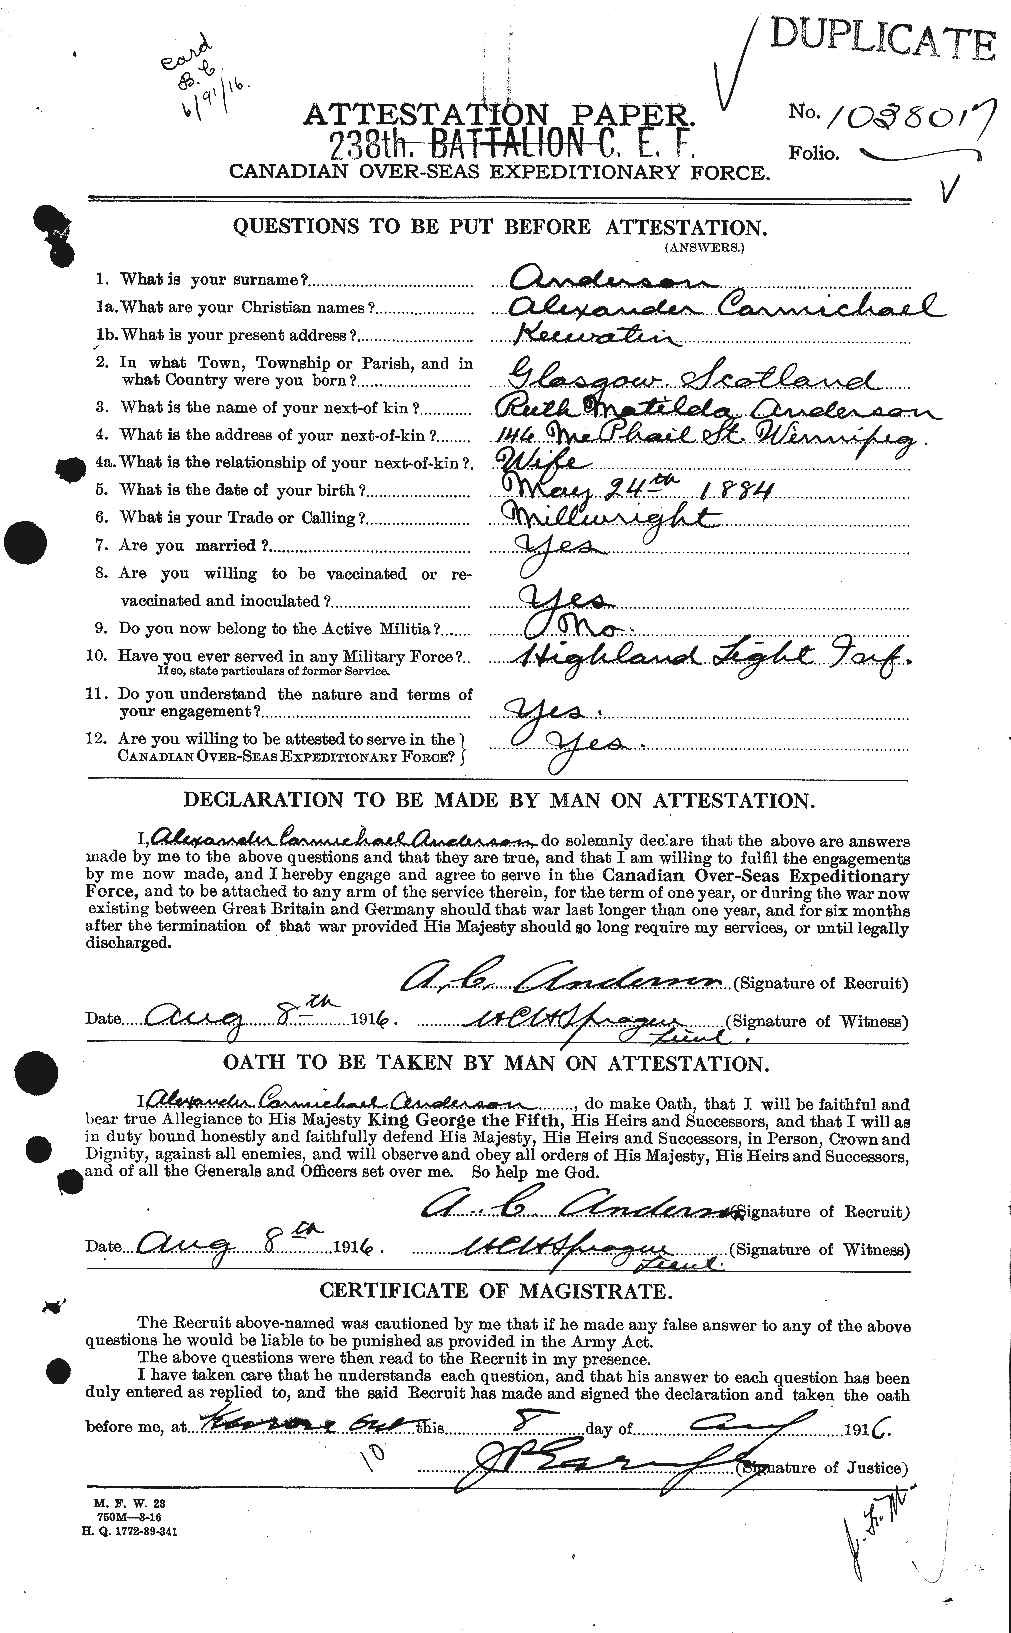 Personnel Records of the First World War - CEF 209494a